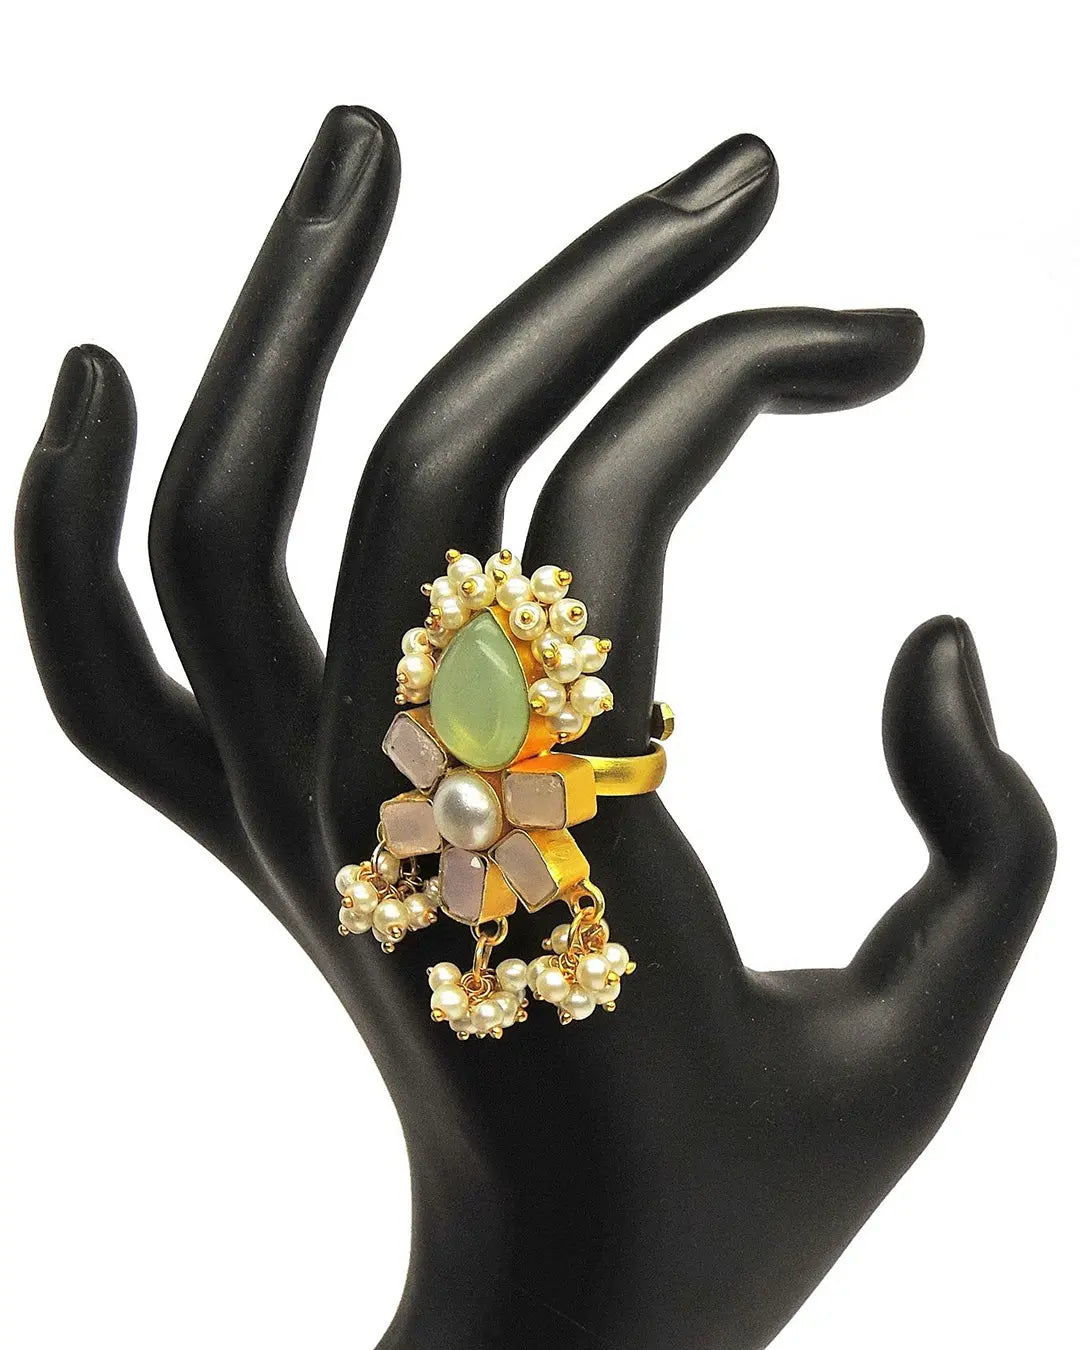 Mela Ring- Handcrafted Jewellery from Dori